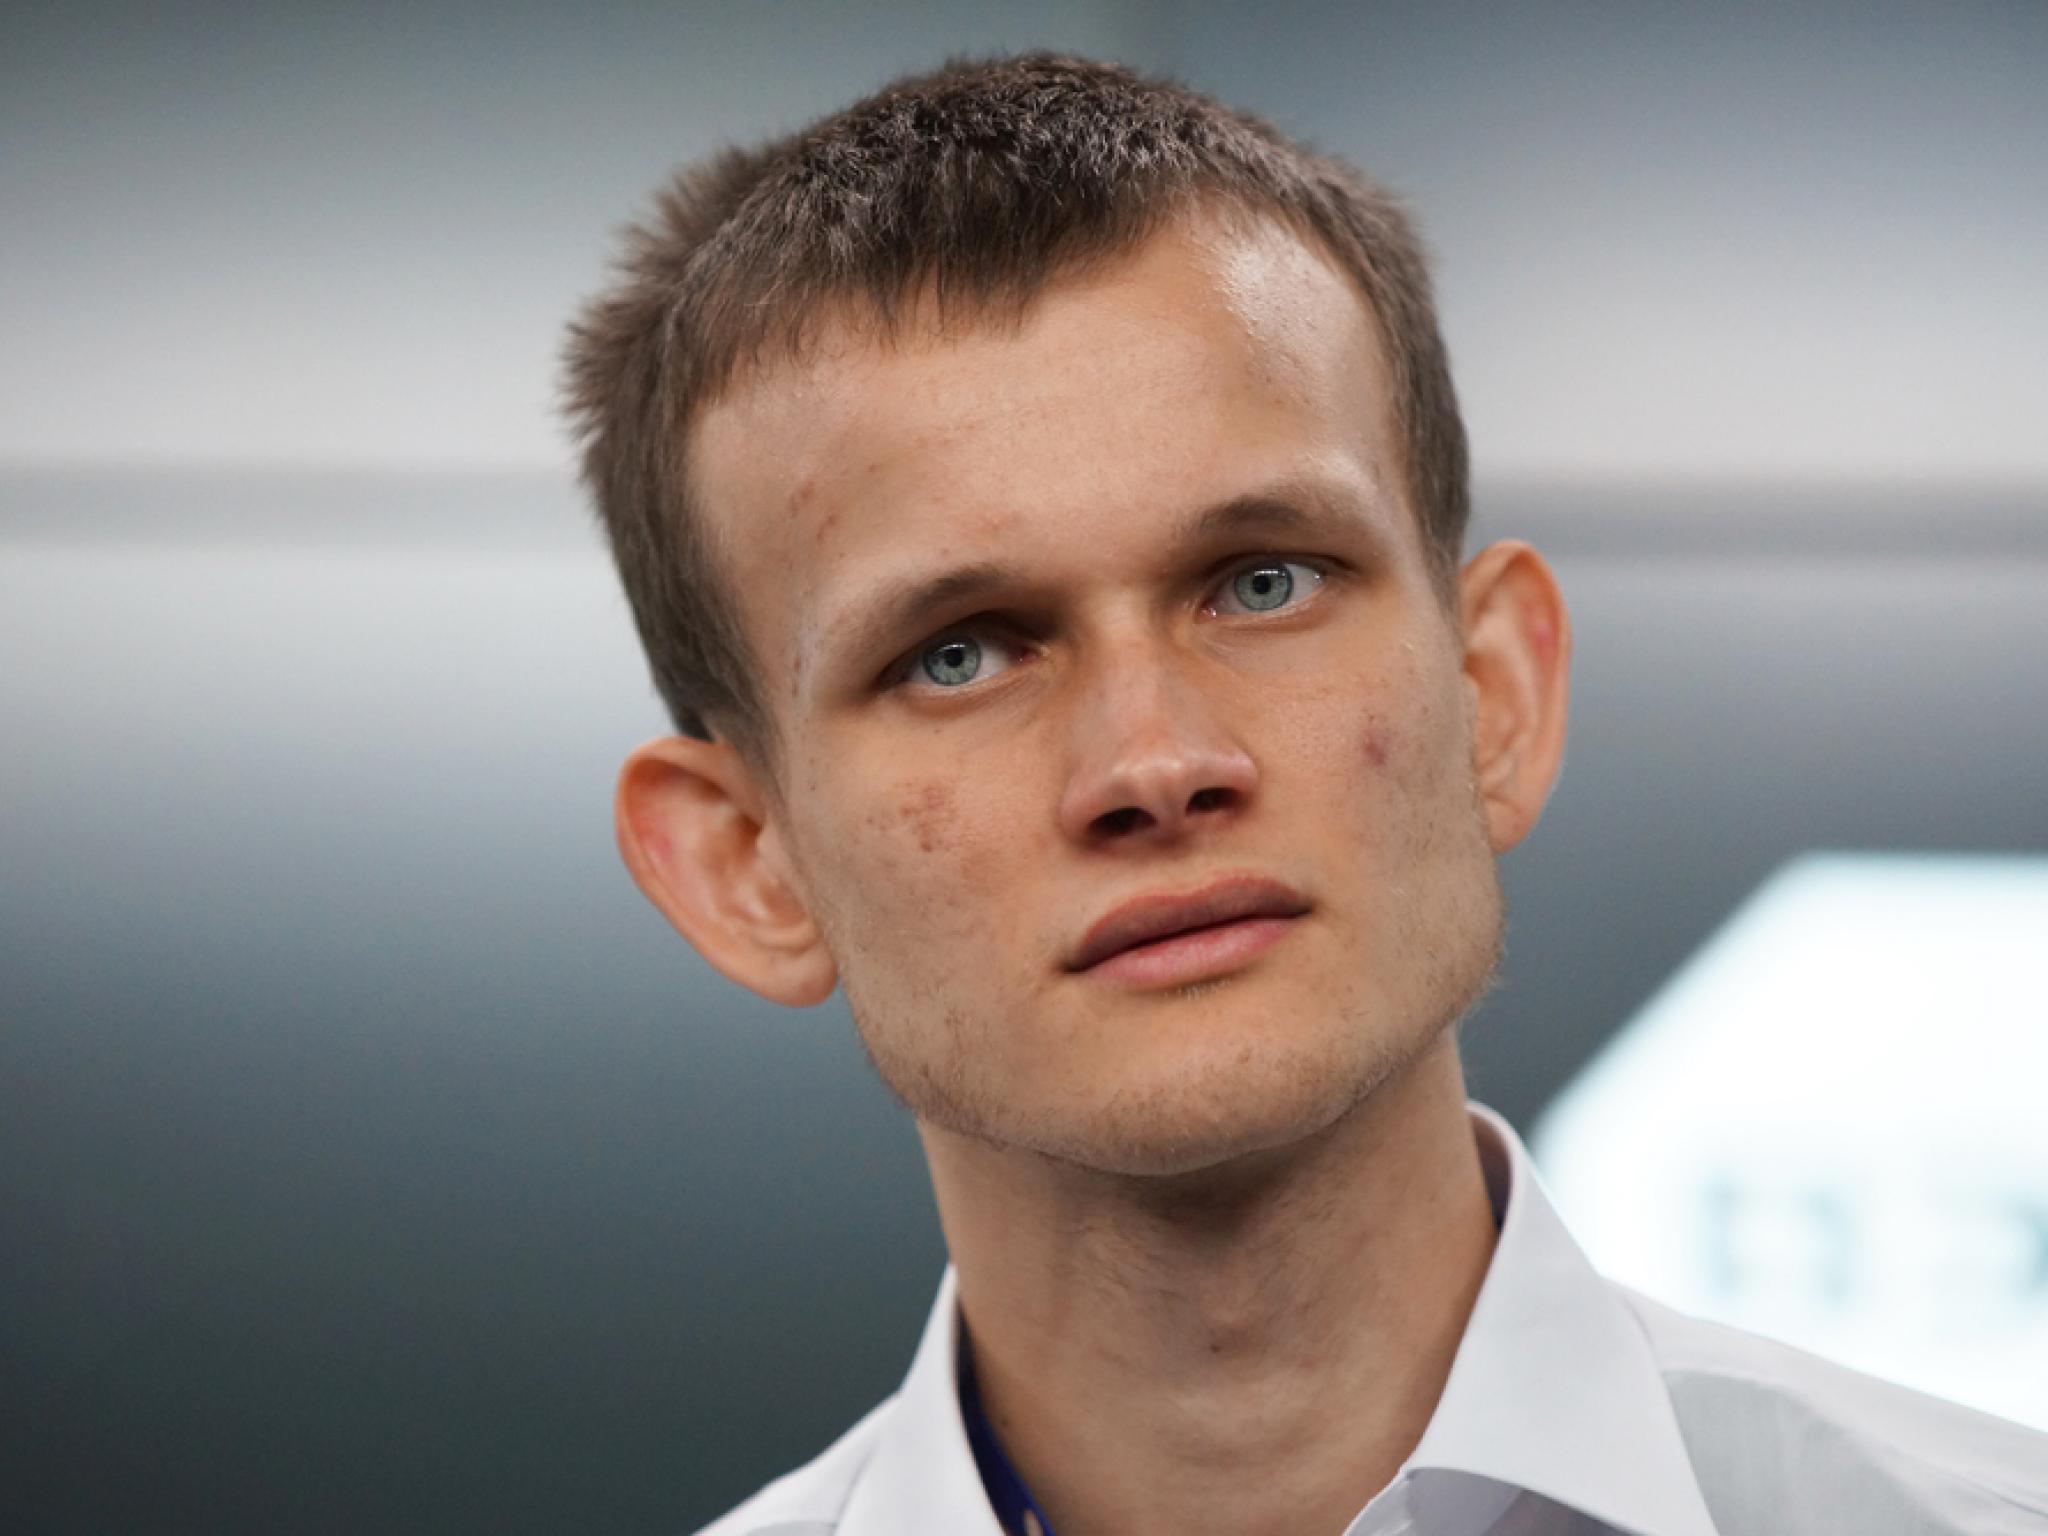  ethereum-co-founder-vitalik-buterin-thinks-the-metaverse-is-poorly-defined-and-often-seen-more-as-a-brand-name-than-a-product 